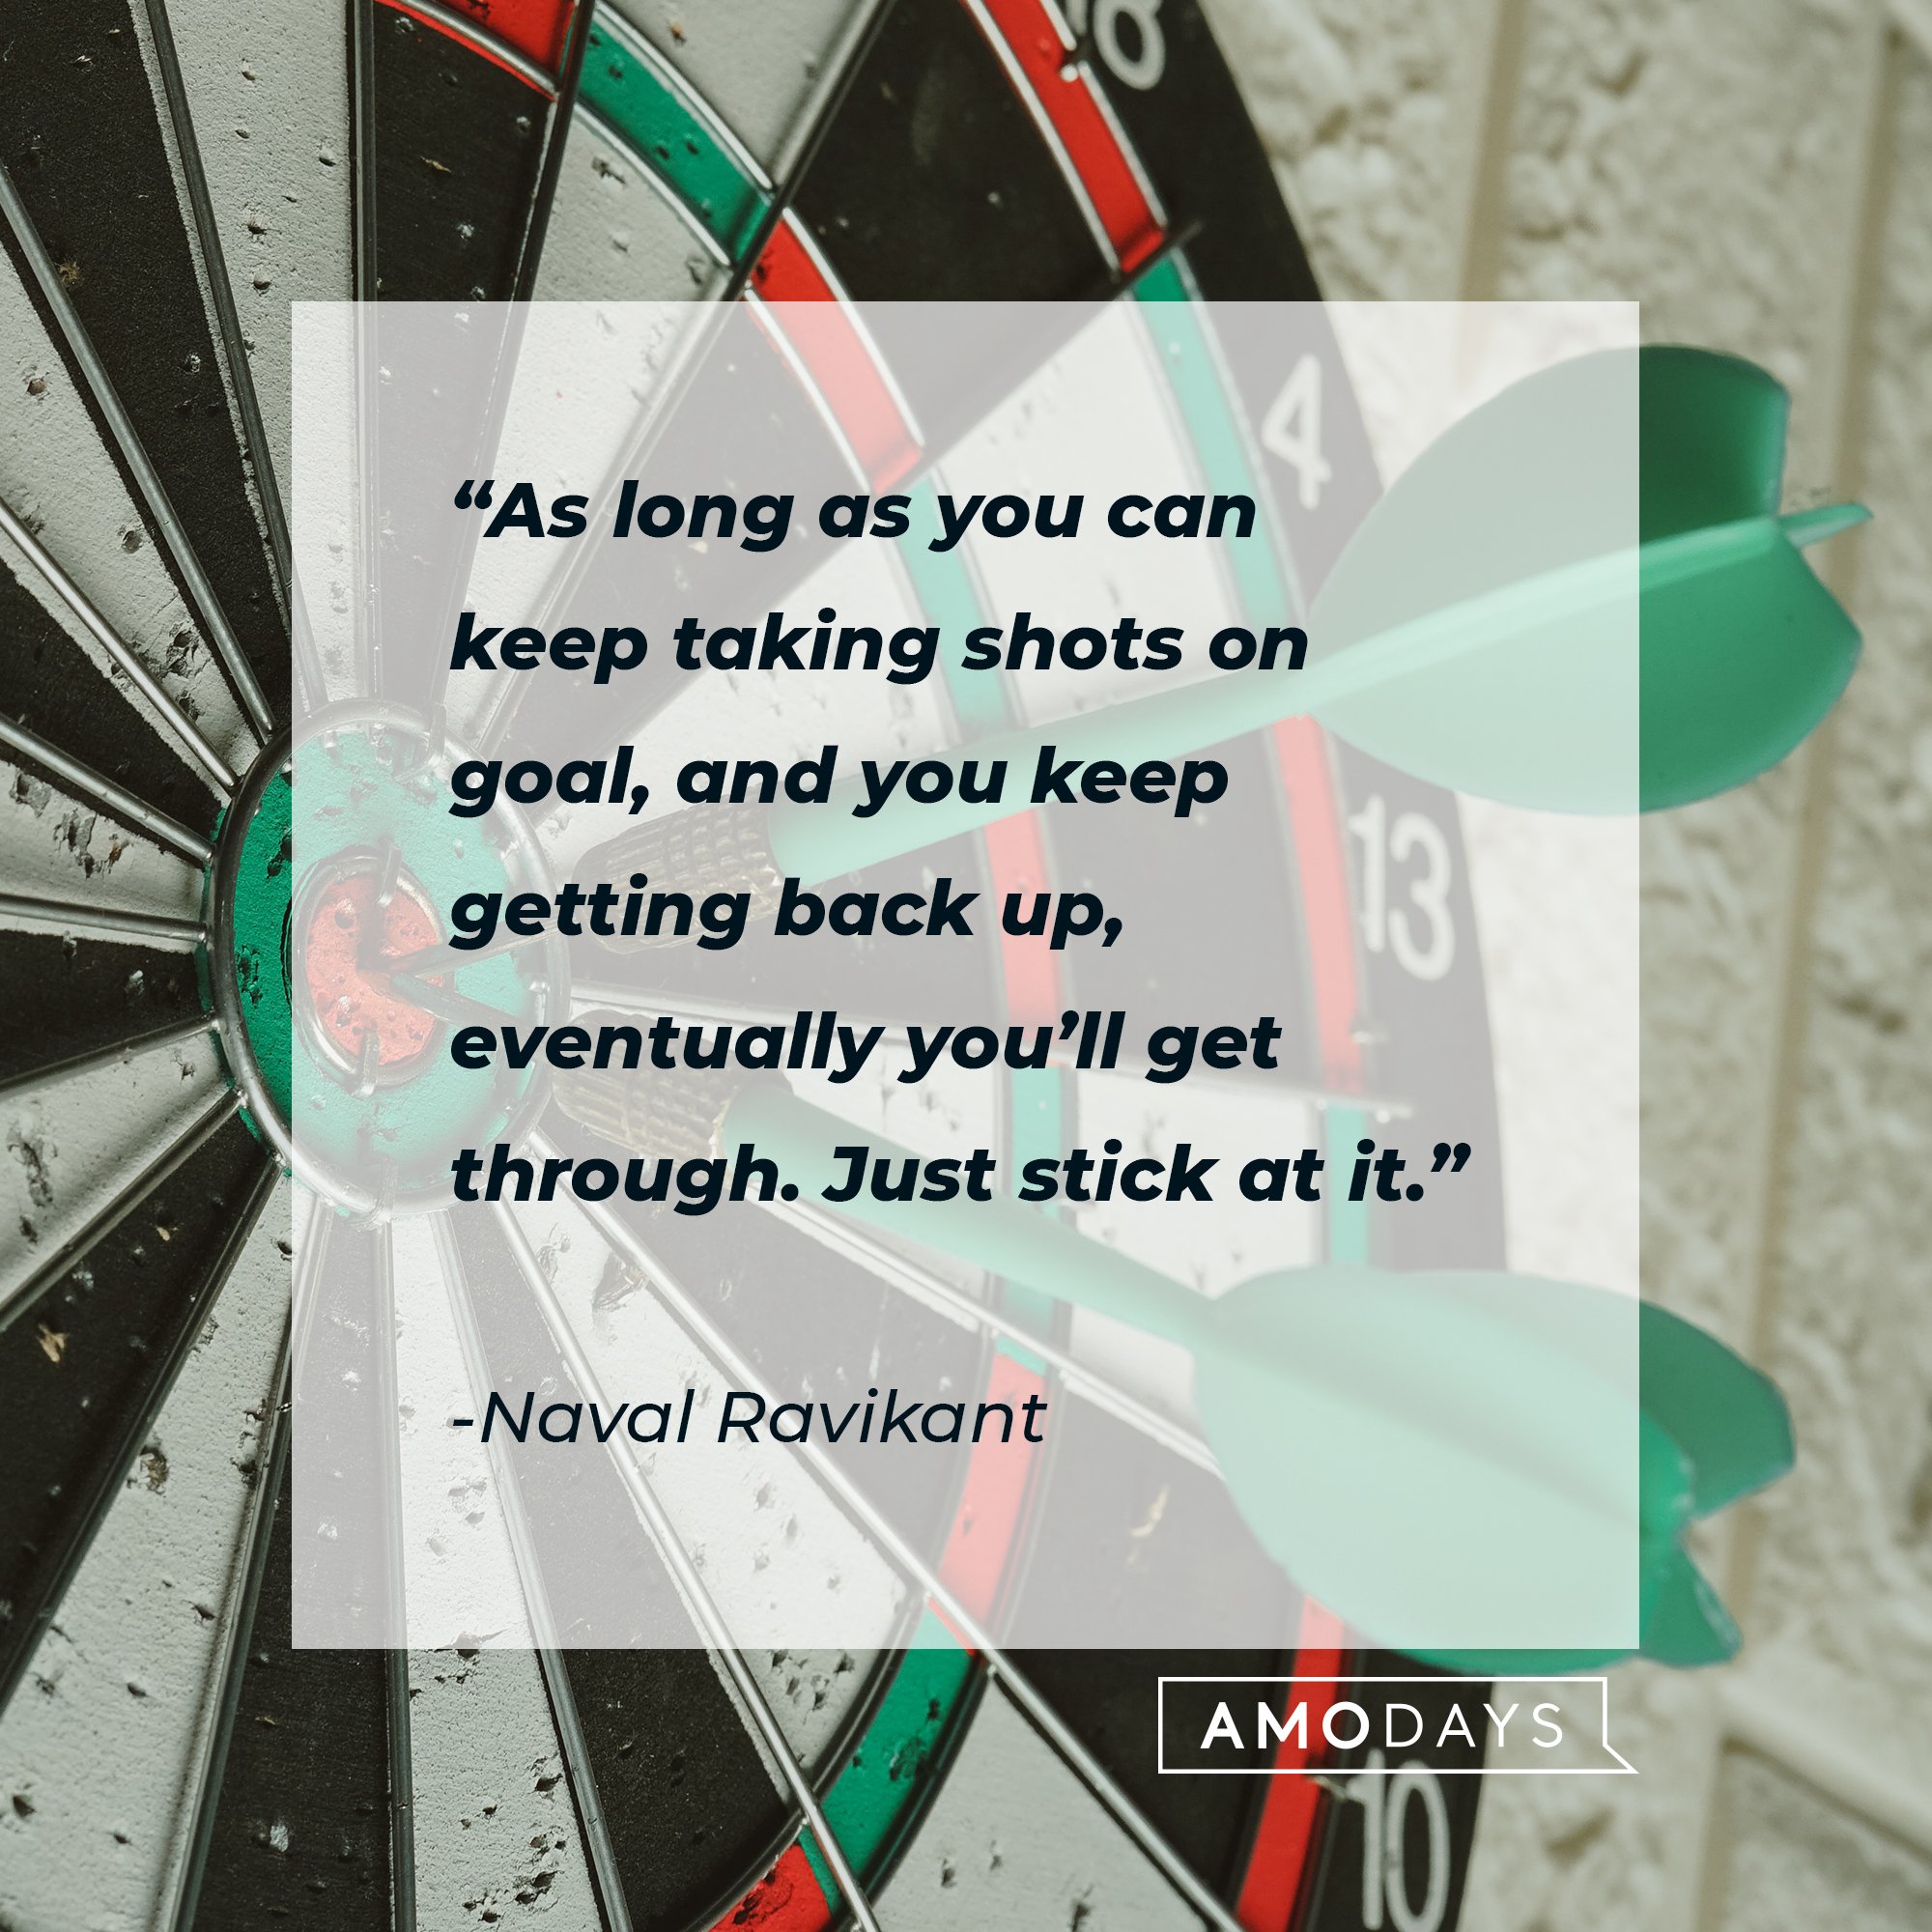 Naval Ravikant's quote: "As long as you can keep taking shots on goal, and you keep getting back up, eventually you’ll get through. Just stick at it." | Image: AmoDays